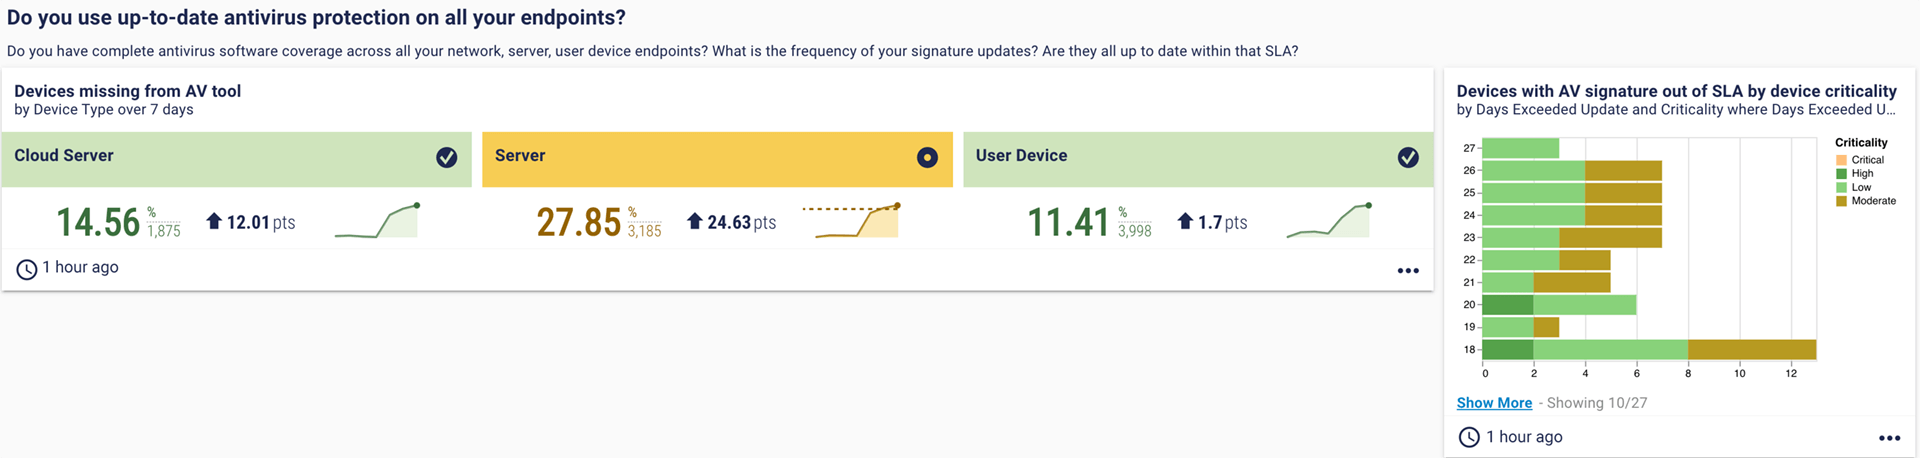 Dashboard: Do you use up-to-date antivirus protection on all your endpoints